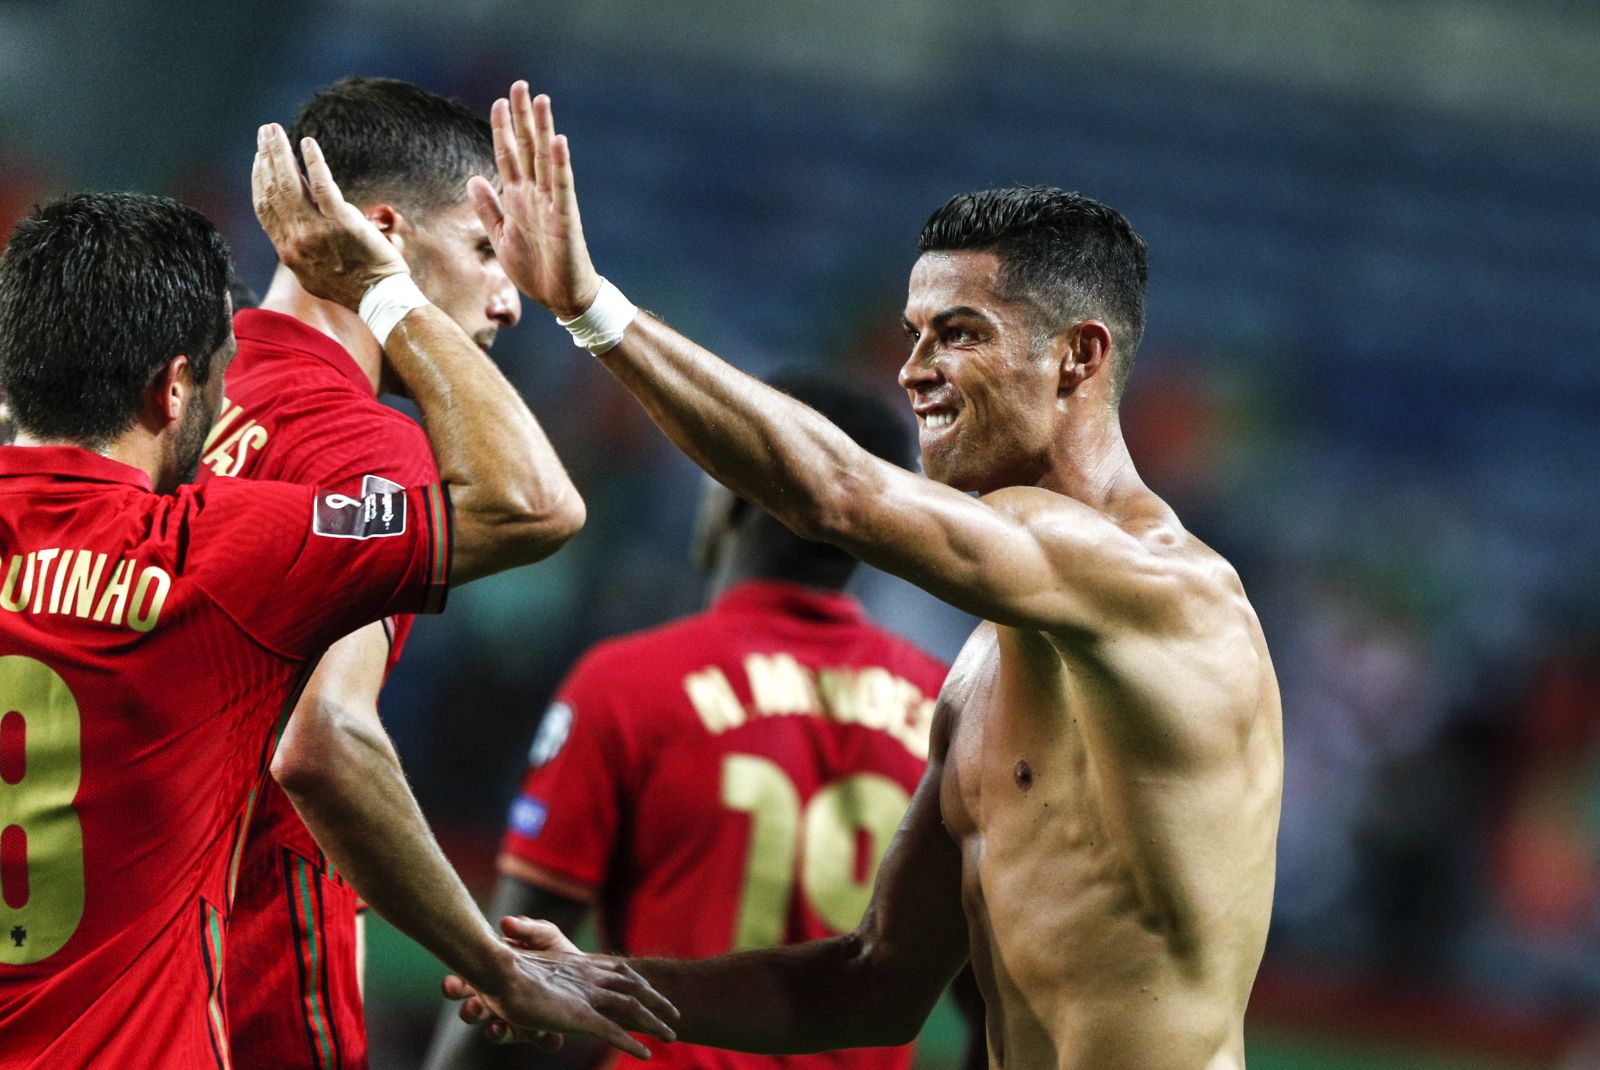 epa09441734 Cristiano Ronaldo (R) of Portugal celebrates after scoring a goal during the FIFA World Cup Qatar 2022 group A qualification soccer match between Portugal and Ireland held at Algarve stadium in Faro, Portugal, 01 September  2021.  EPA/ANTONIO COTRIM